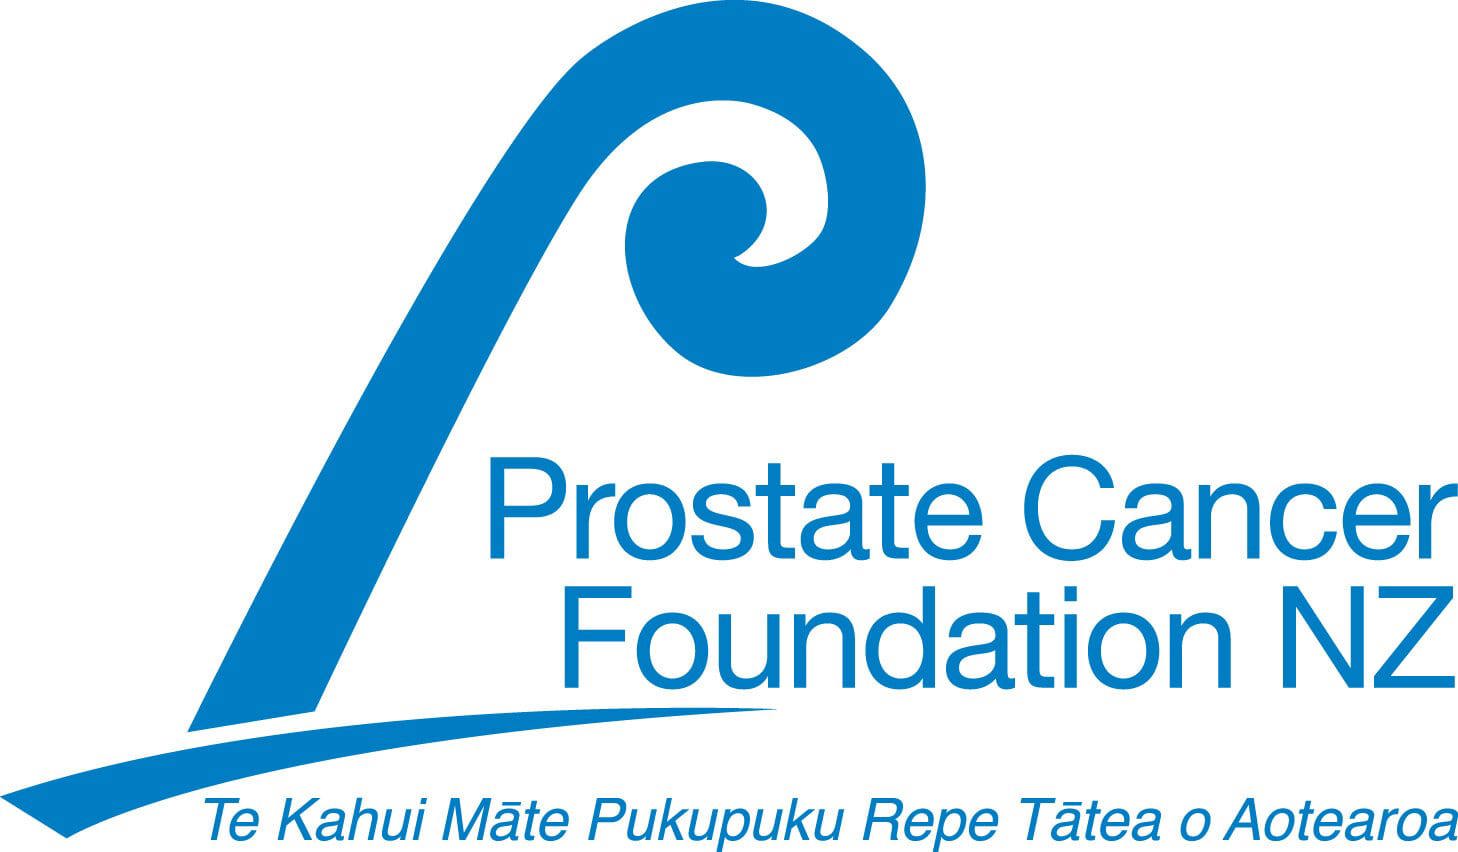 Non-profit funding partner Prostrate Cancer Foundation